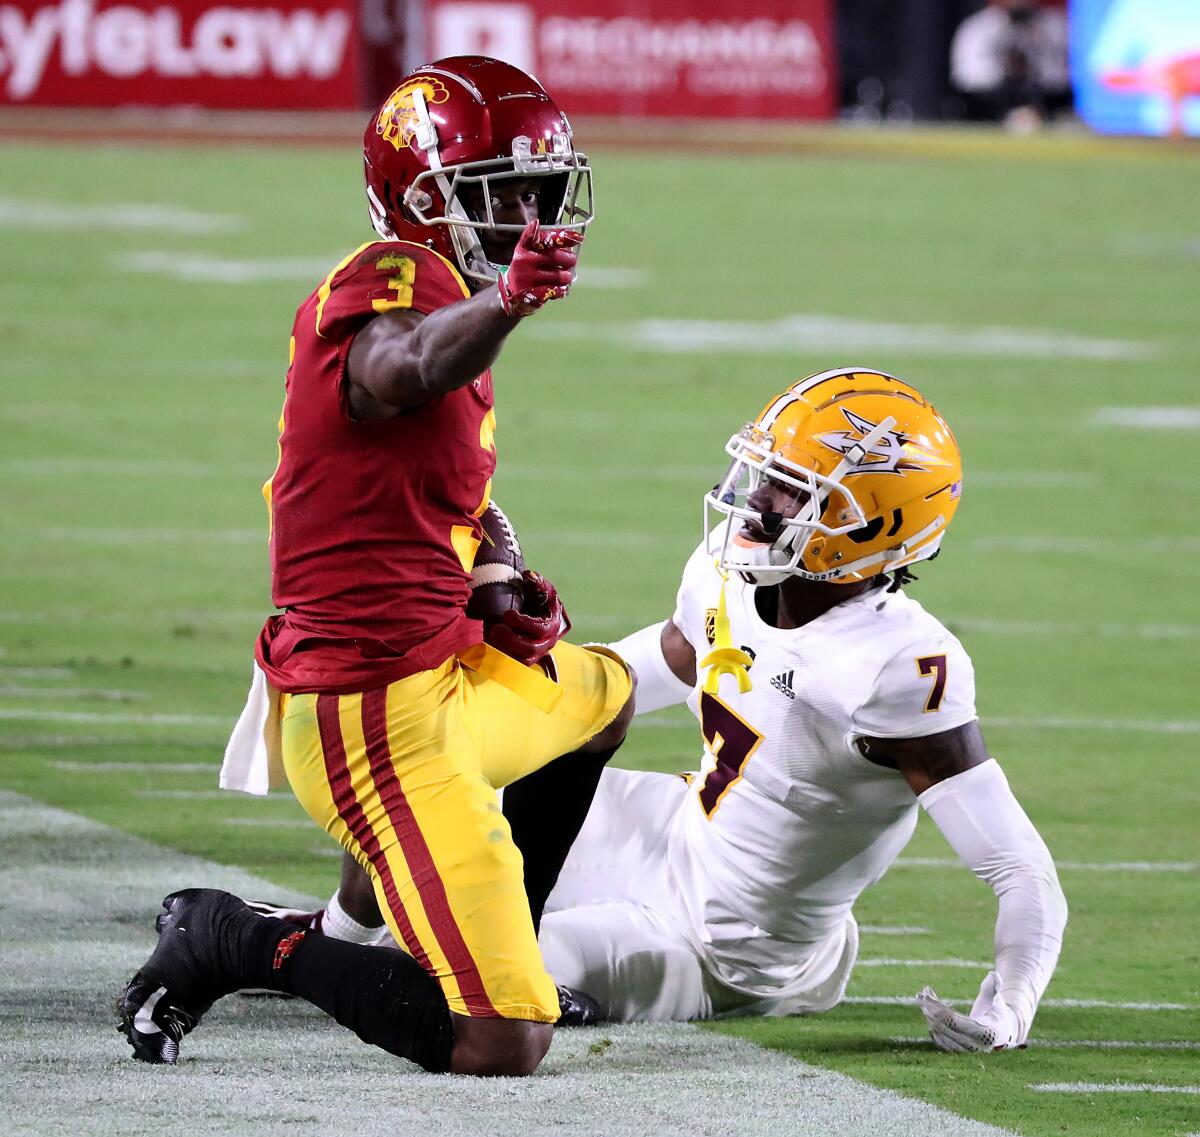 USC wide receiver Jordan Addison signals for a first down after making a catch against Arizona State's Timarcus Davis.